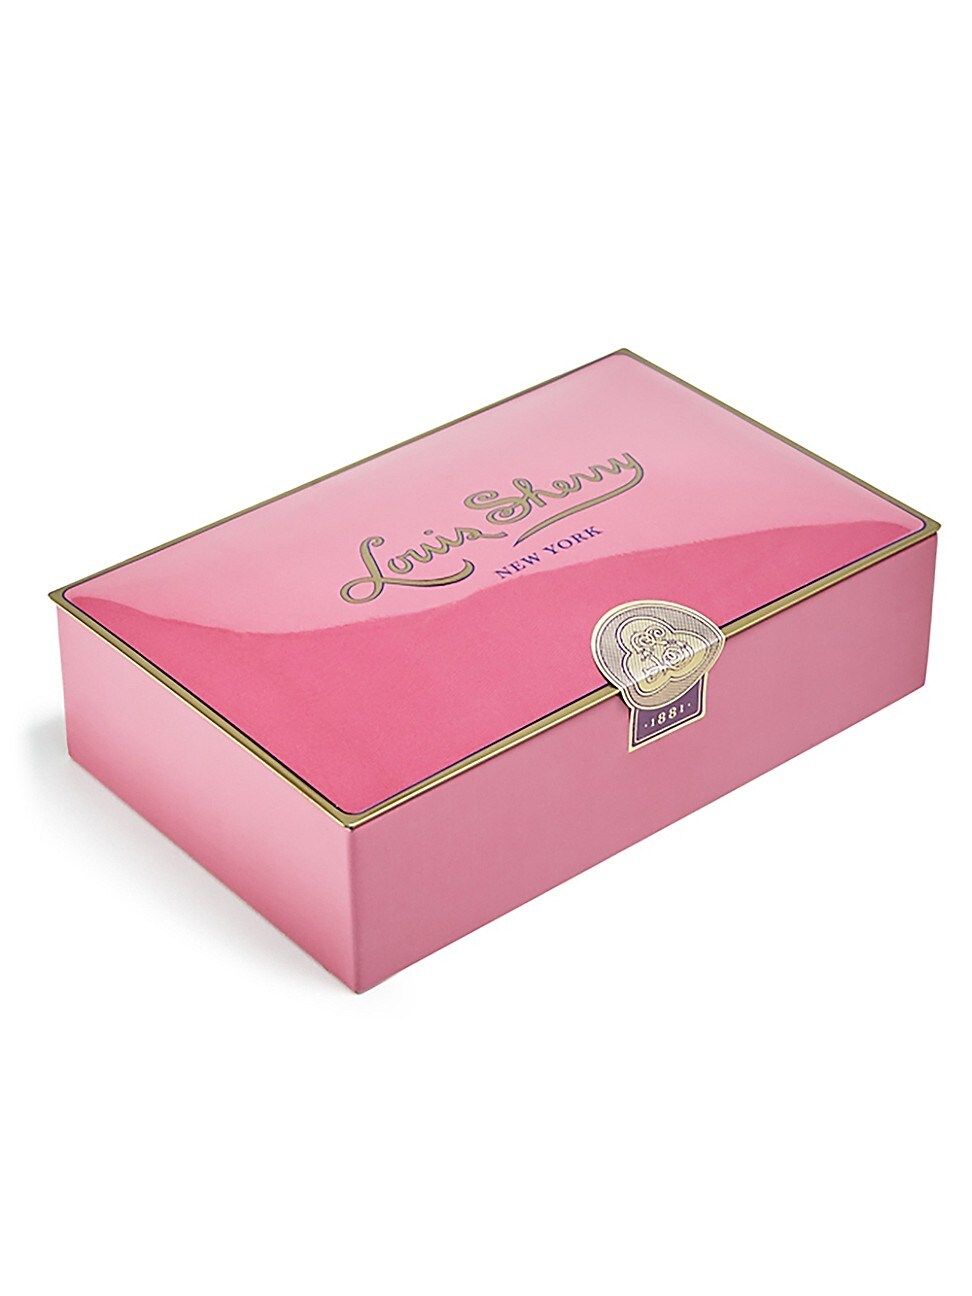 12-Piece Draper Pink Chocolate Truffle Collection | Saks Fifth Avenue